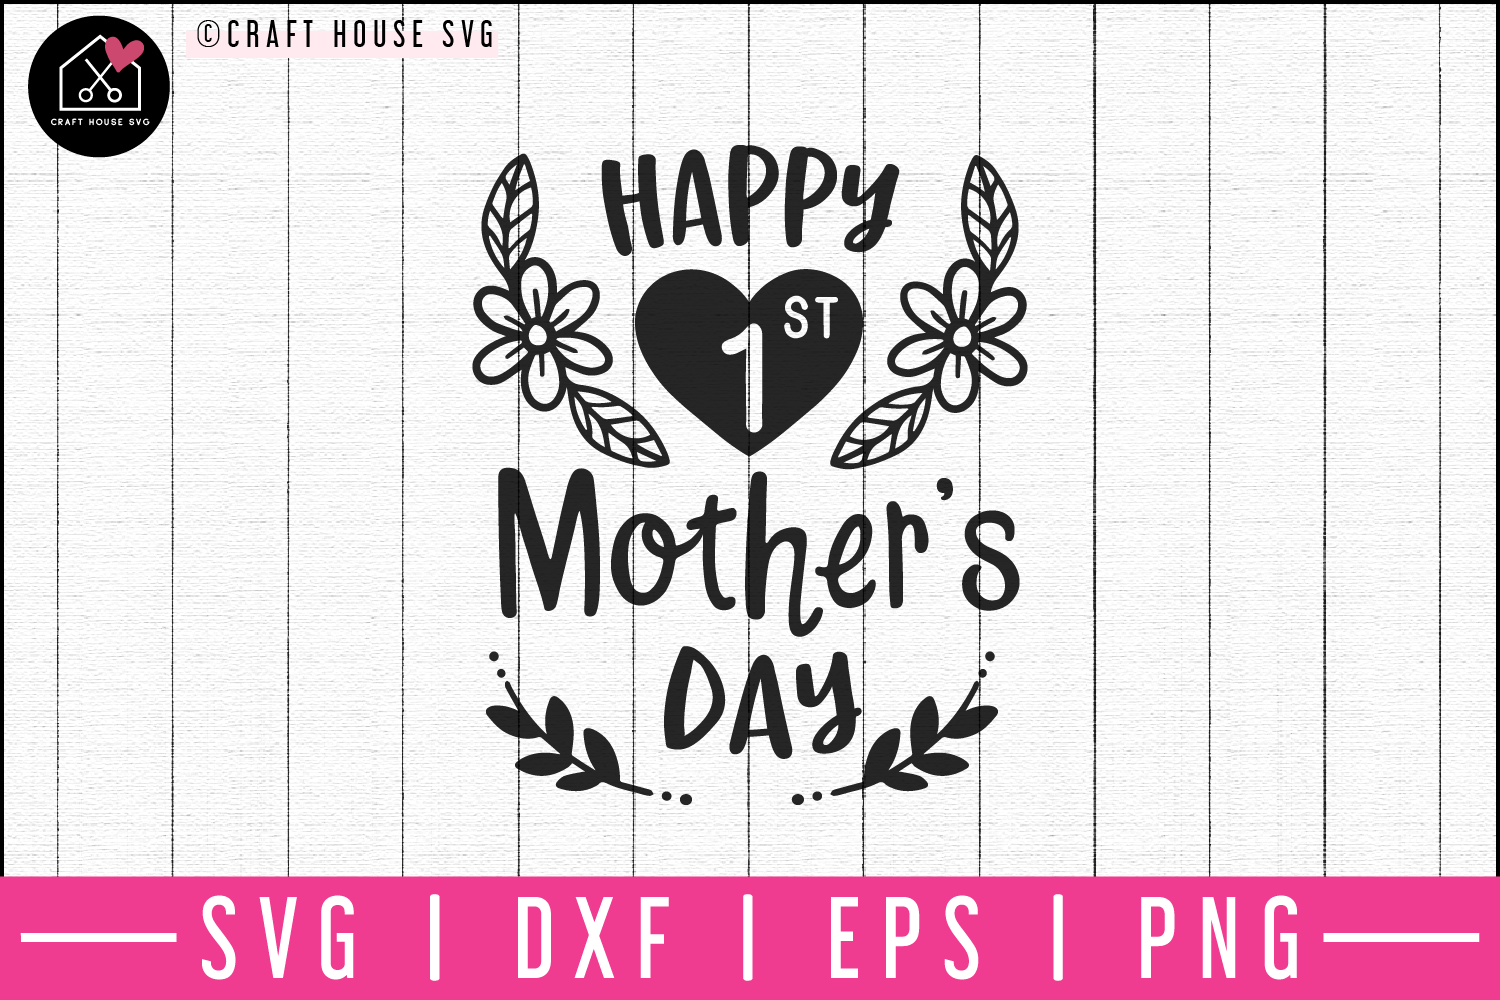 Happy first mothers day SVG | M52F Craft House SVG - SVG files for Cricut and Silhouette